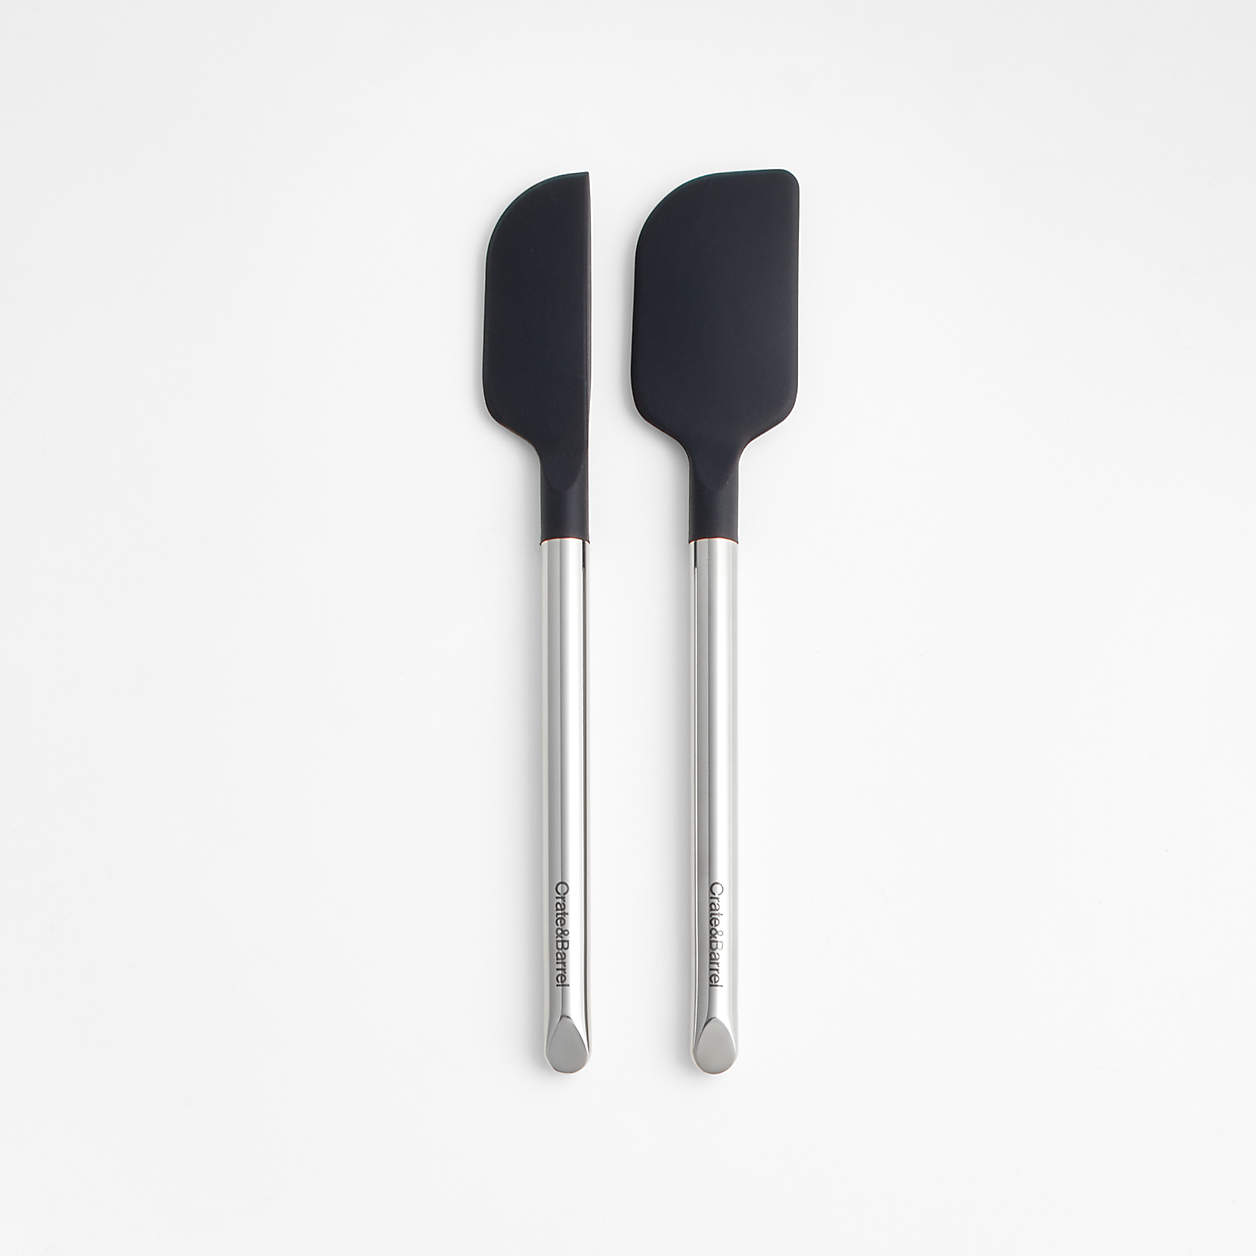 Crate & Barrel Black Silicone and Stainless Steel Mini Spatulas, Set of 2